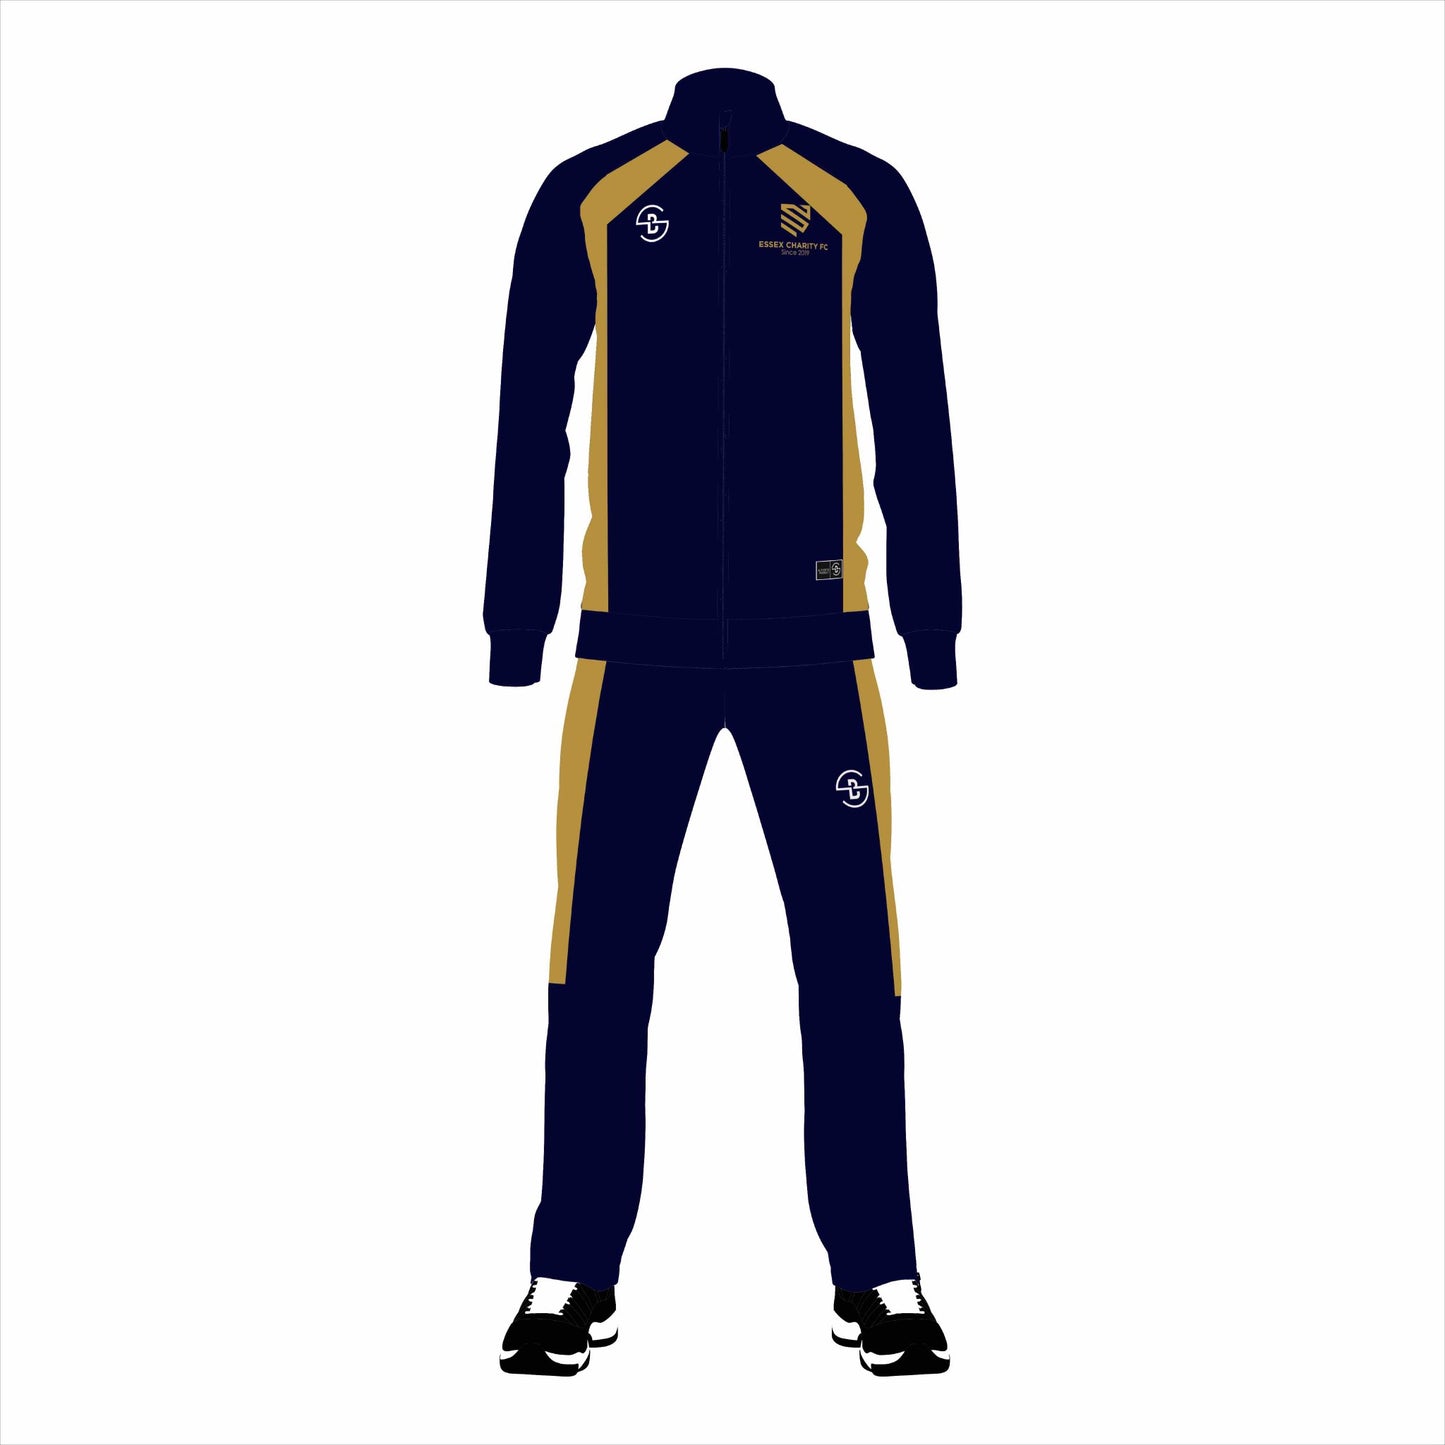 Essex Charity Tracksuit